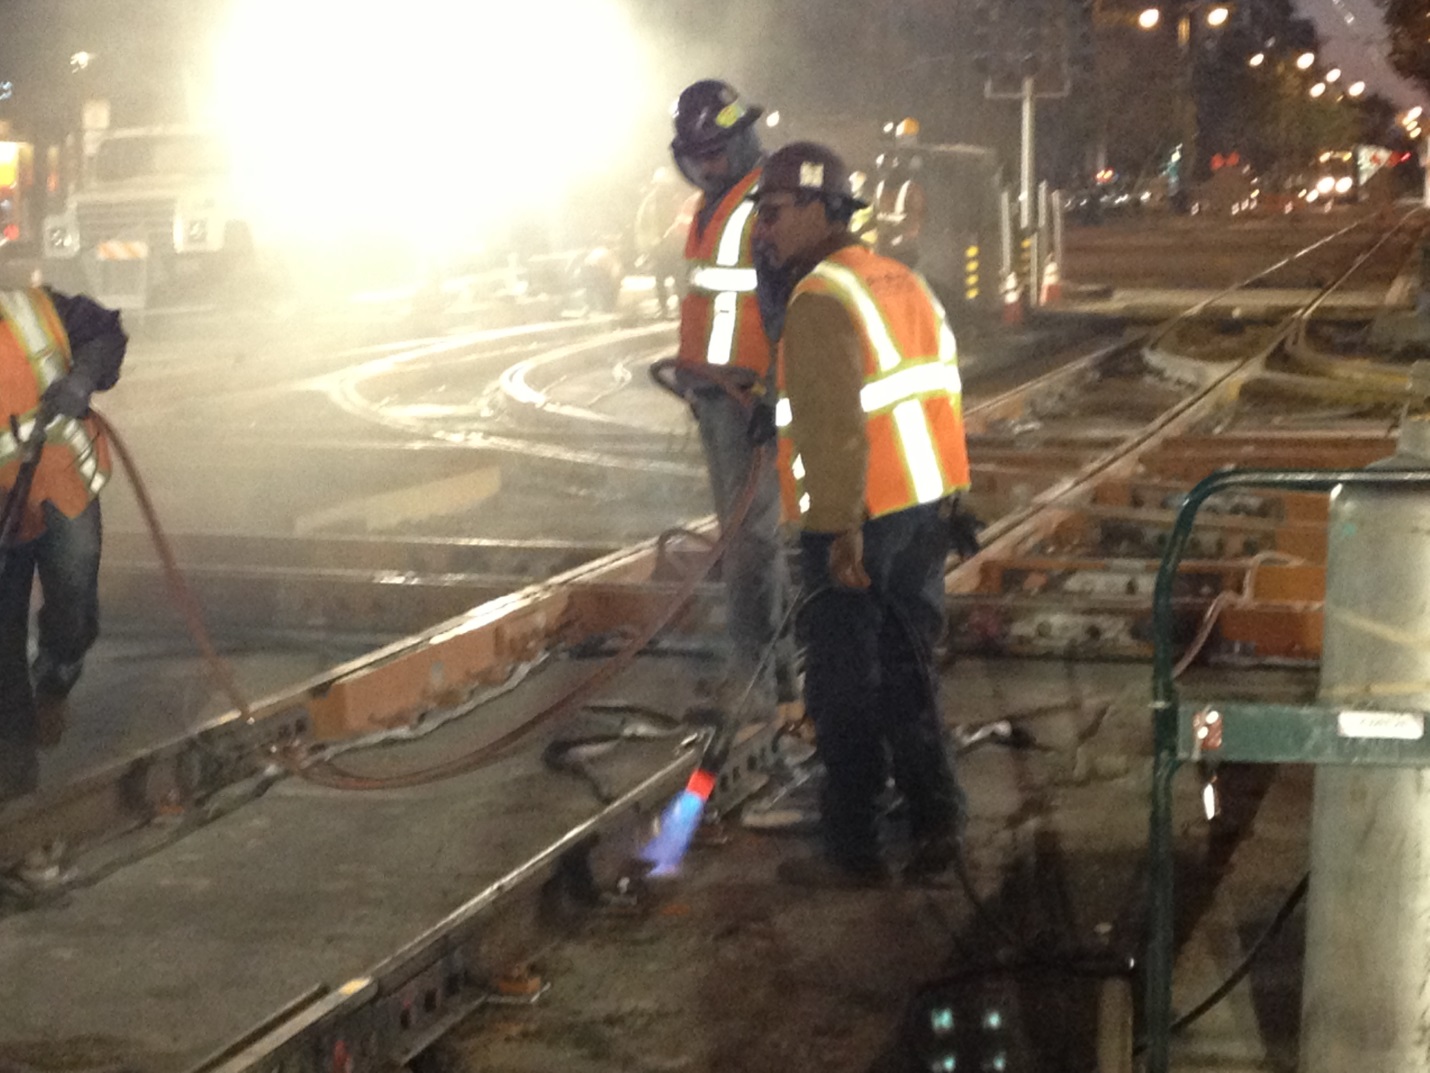 Crew members in safety vest and hard hats stand next to tracks being installed at 4th and King at night. Welding gear and safety strips are glowing 